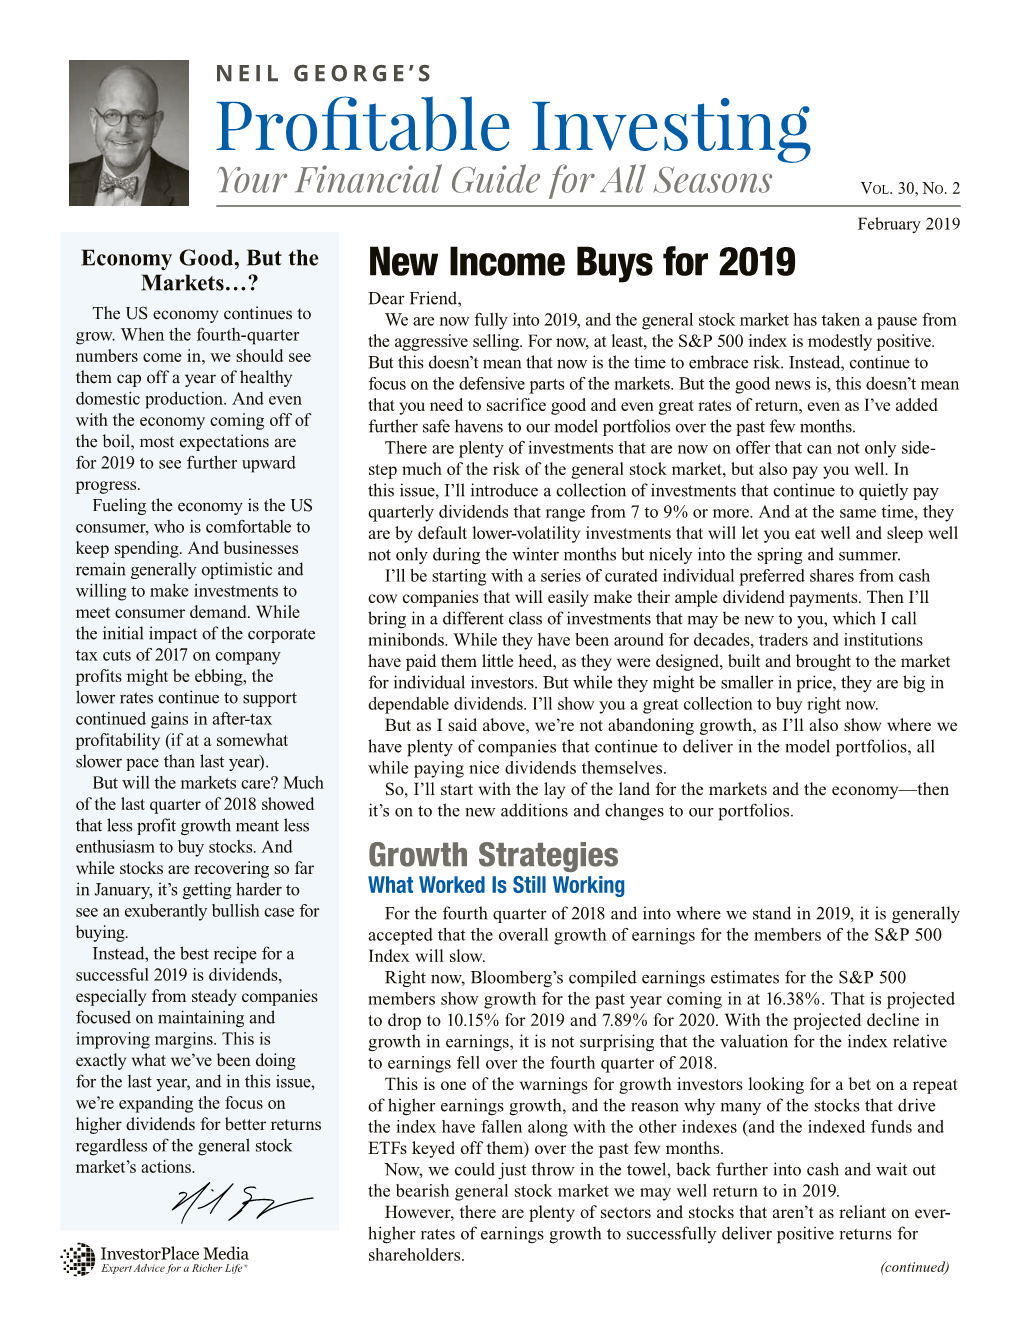 New Income Buys for 2019 Dear Friend, the US Economy Continues to We Are Now Fully Into 2019, and the General Stock Market Has Taken a Pause from Grow